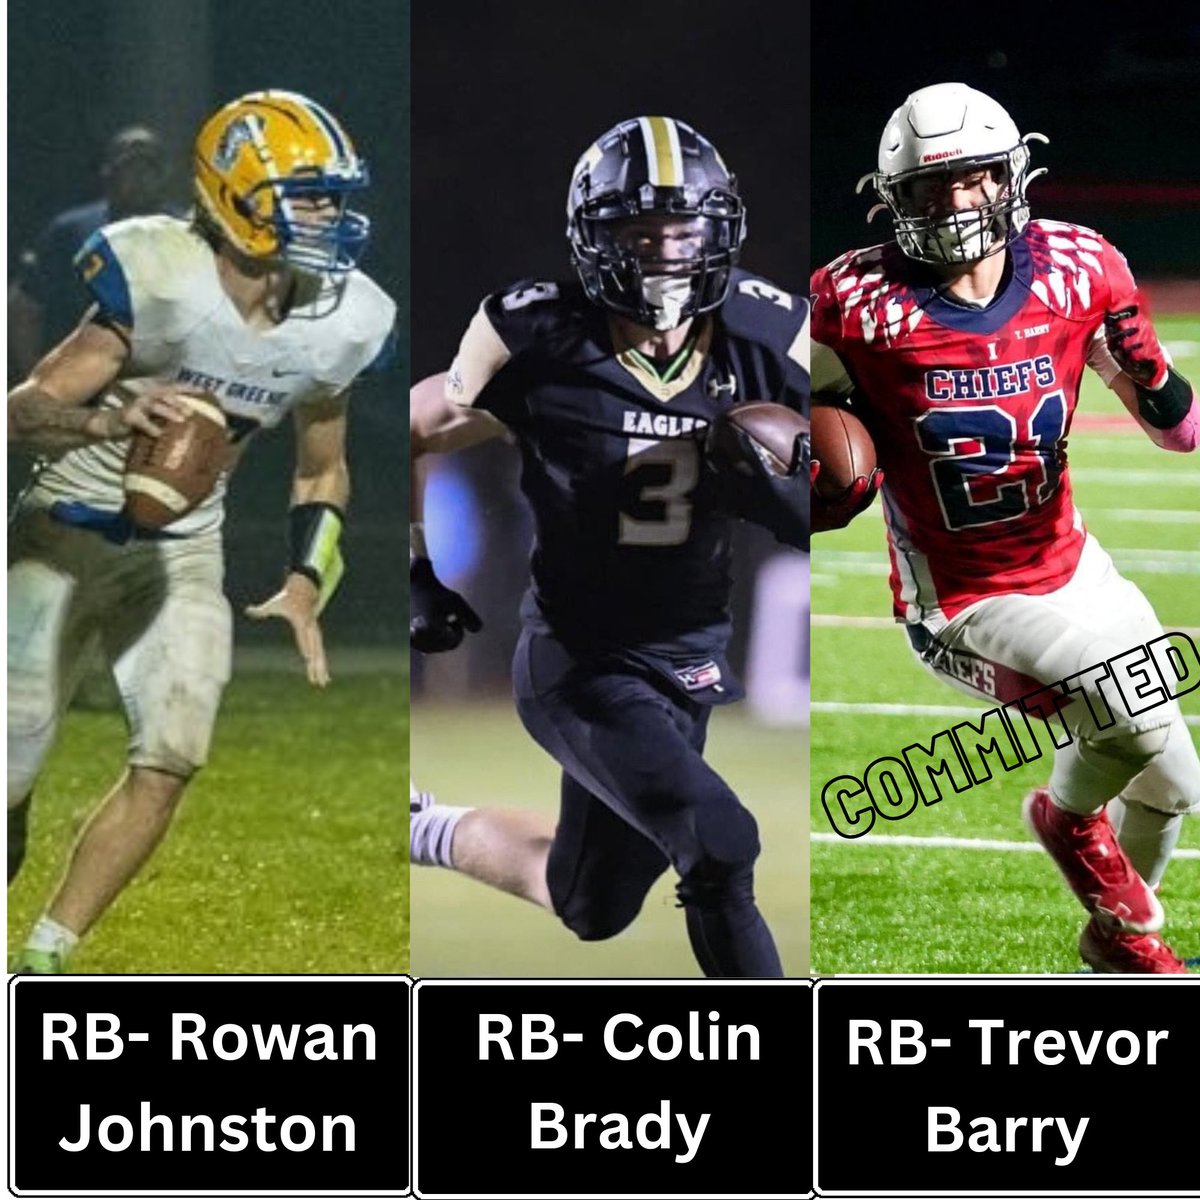 🚨TOP OFFENSIVE RECRUITS OF THE WEEK🚨 ⭐️Rowan Johnston 📍Trumbell, CT 🏈@rowanfjohnston ⭐️Colin Brady 📍West Greene, PA 🏈@thecolinbrady13 ⭐️Trevor Barry (Committed last night) 📍Iroquois, NY 🏈@TrevorBarry13 College coaches, checkout these ballers! bit.ly/45AVkXn